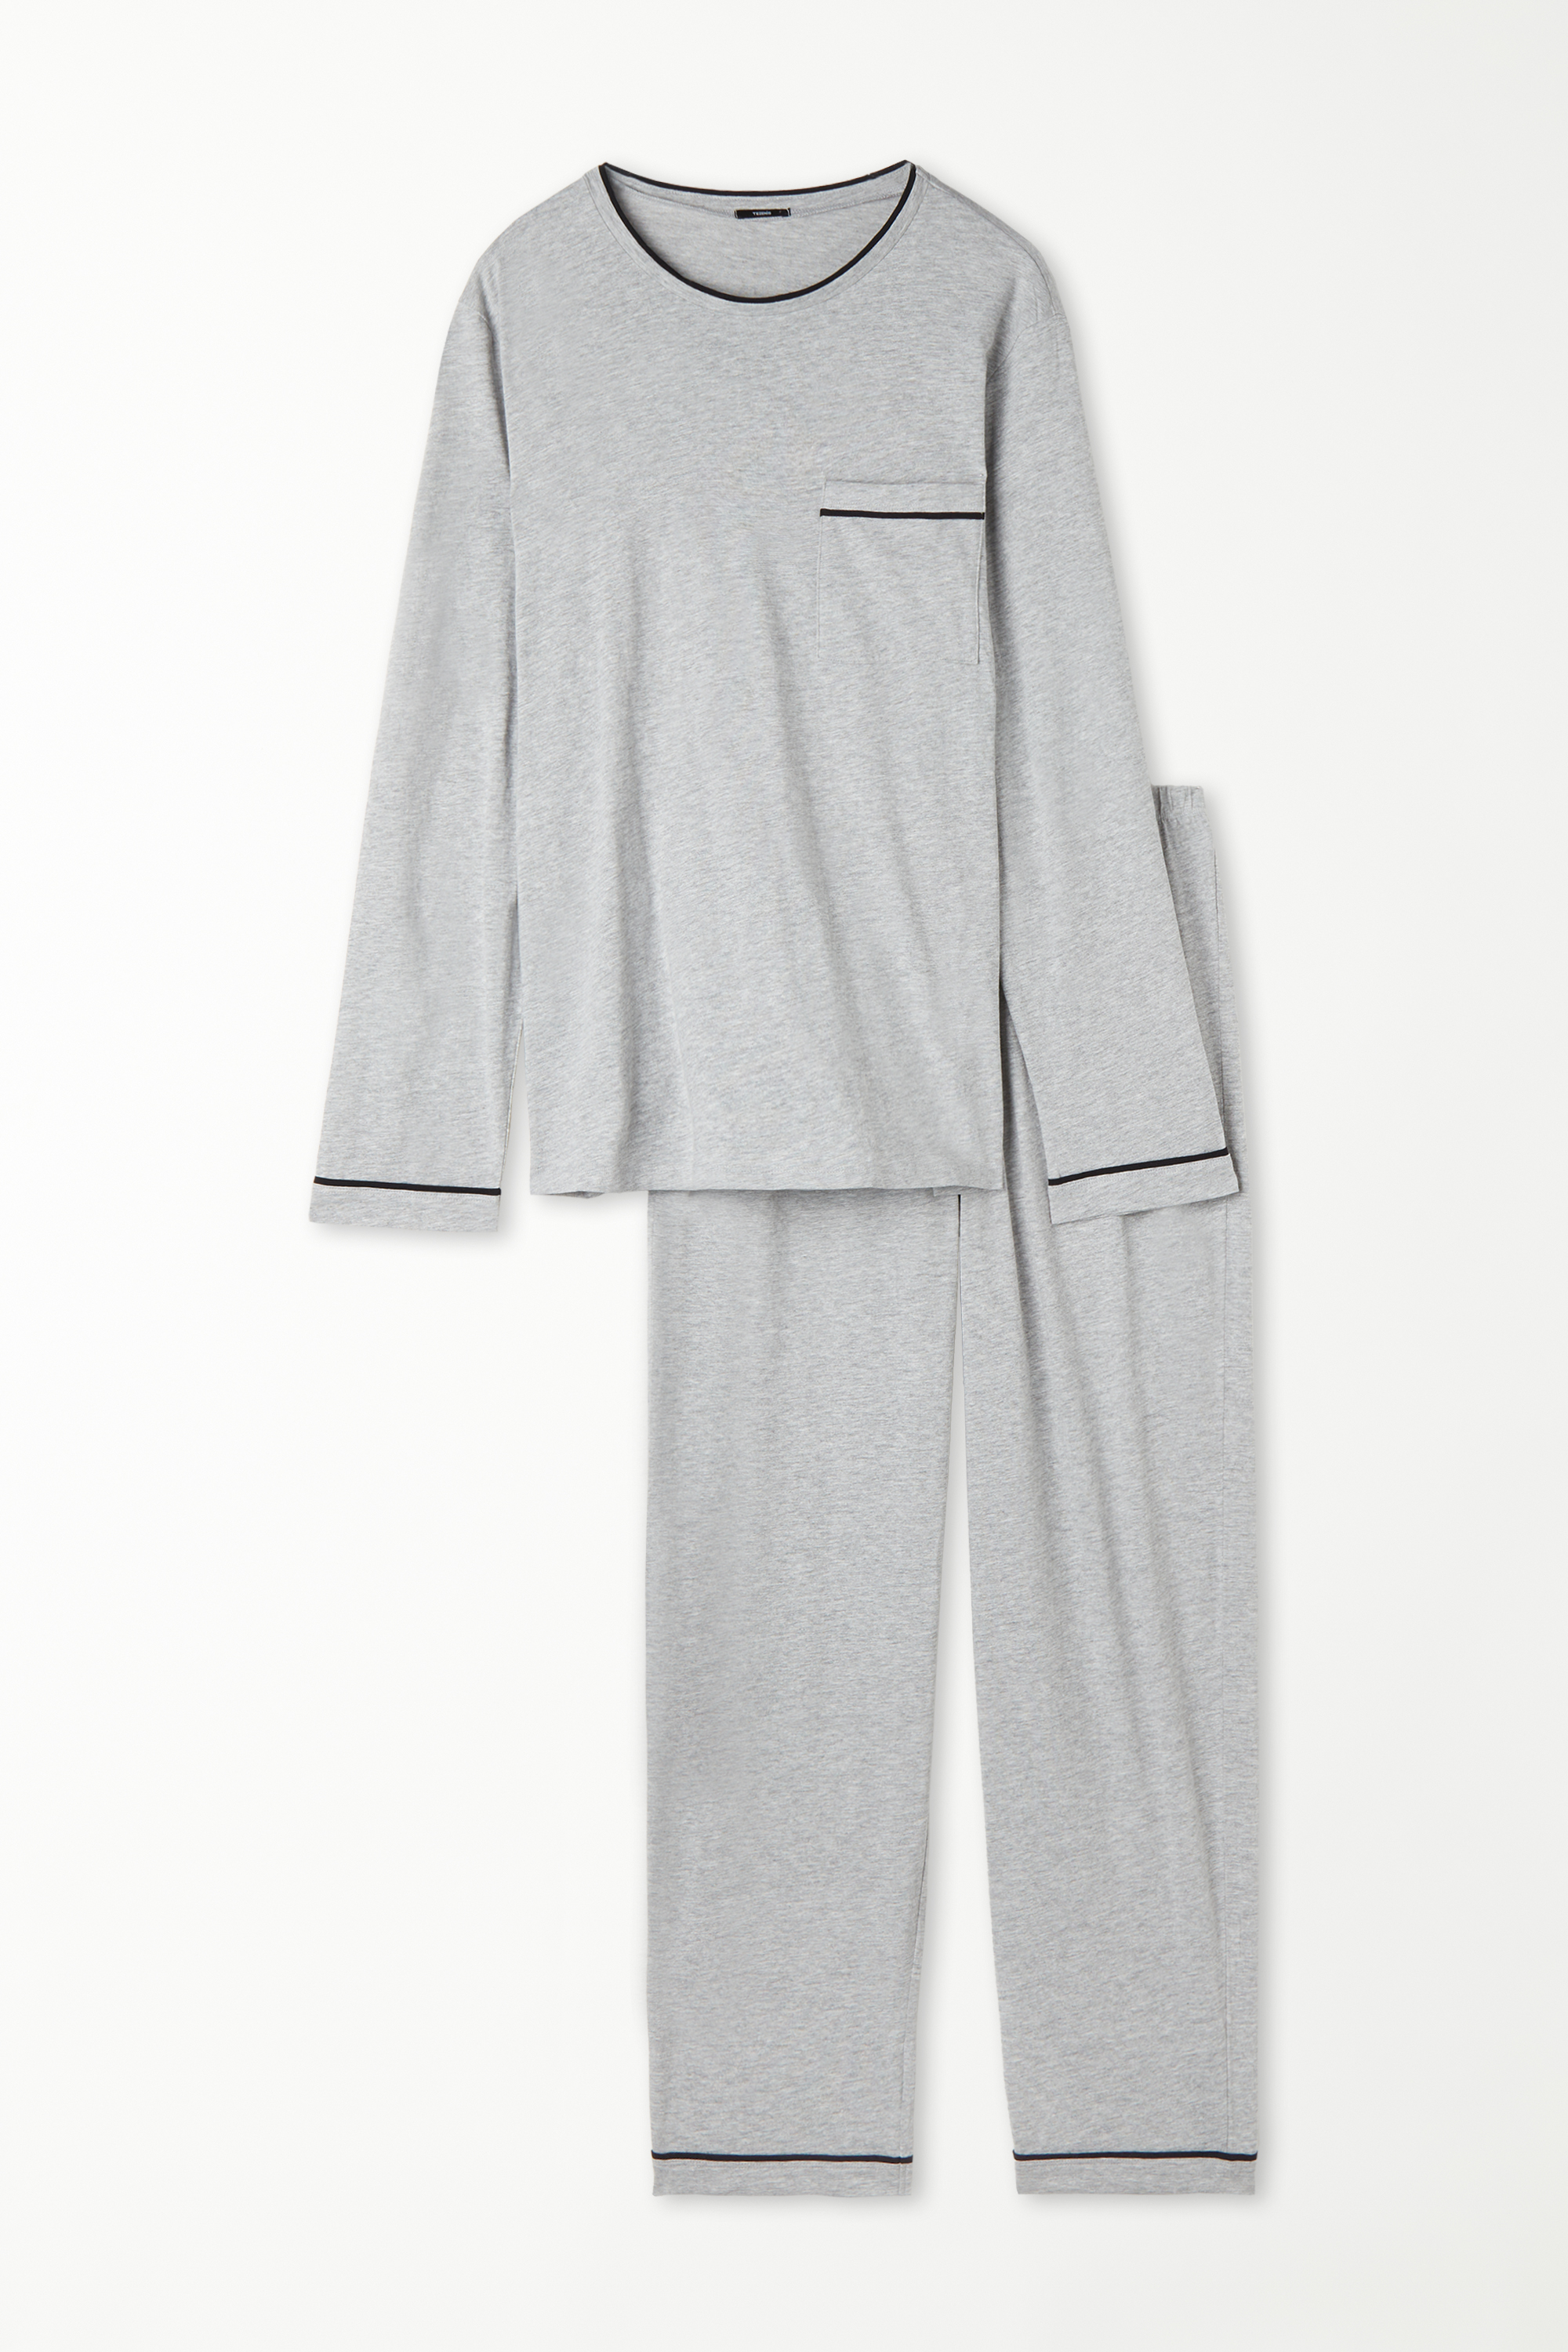 Men’s Full-Length Cotton Pajamas with Piping